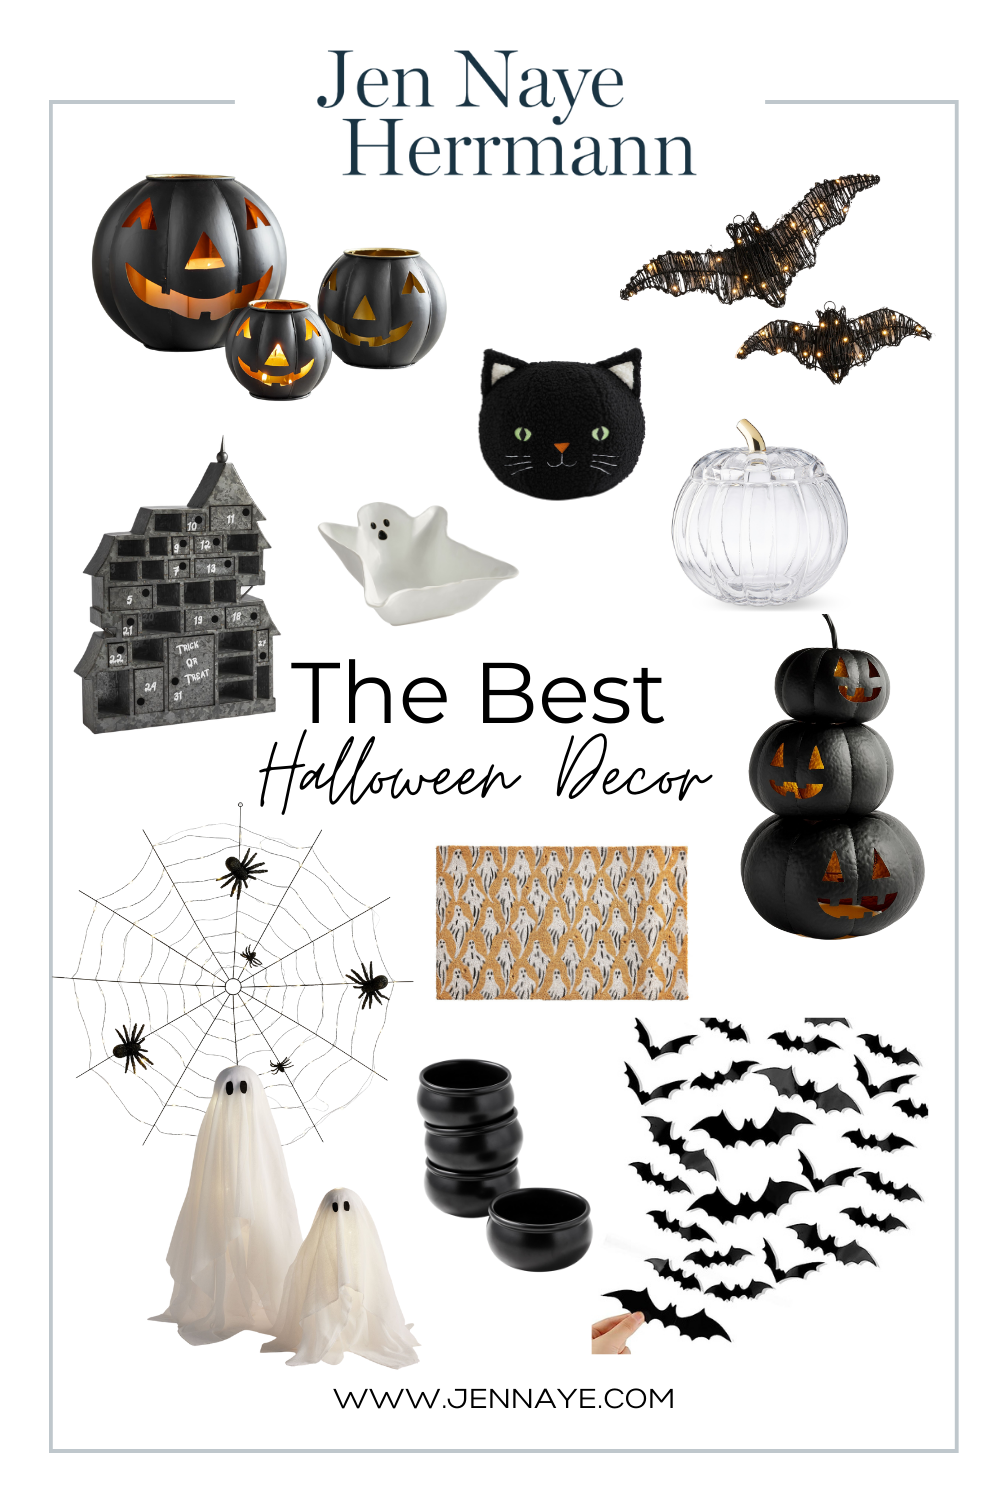 The Best Halloween Decorations for a Porch & Indoors